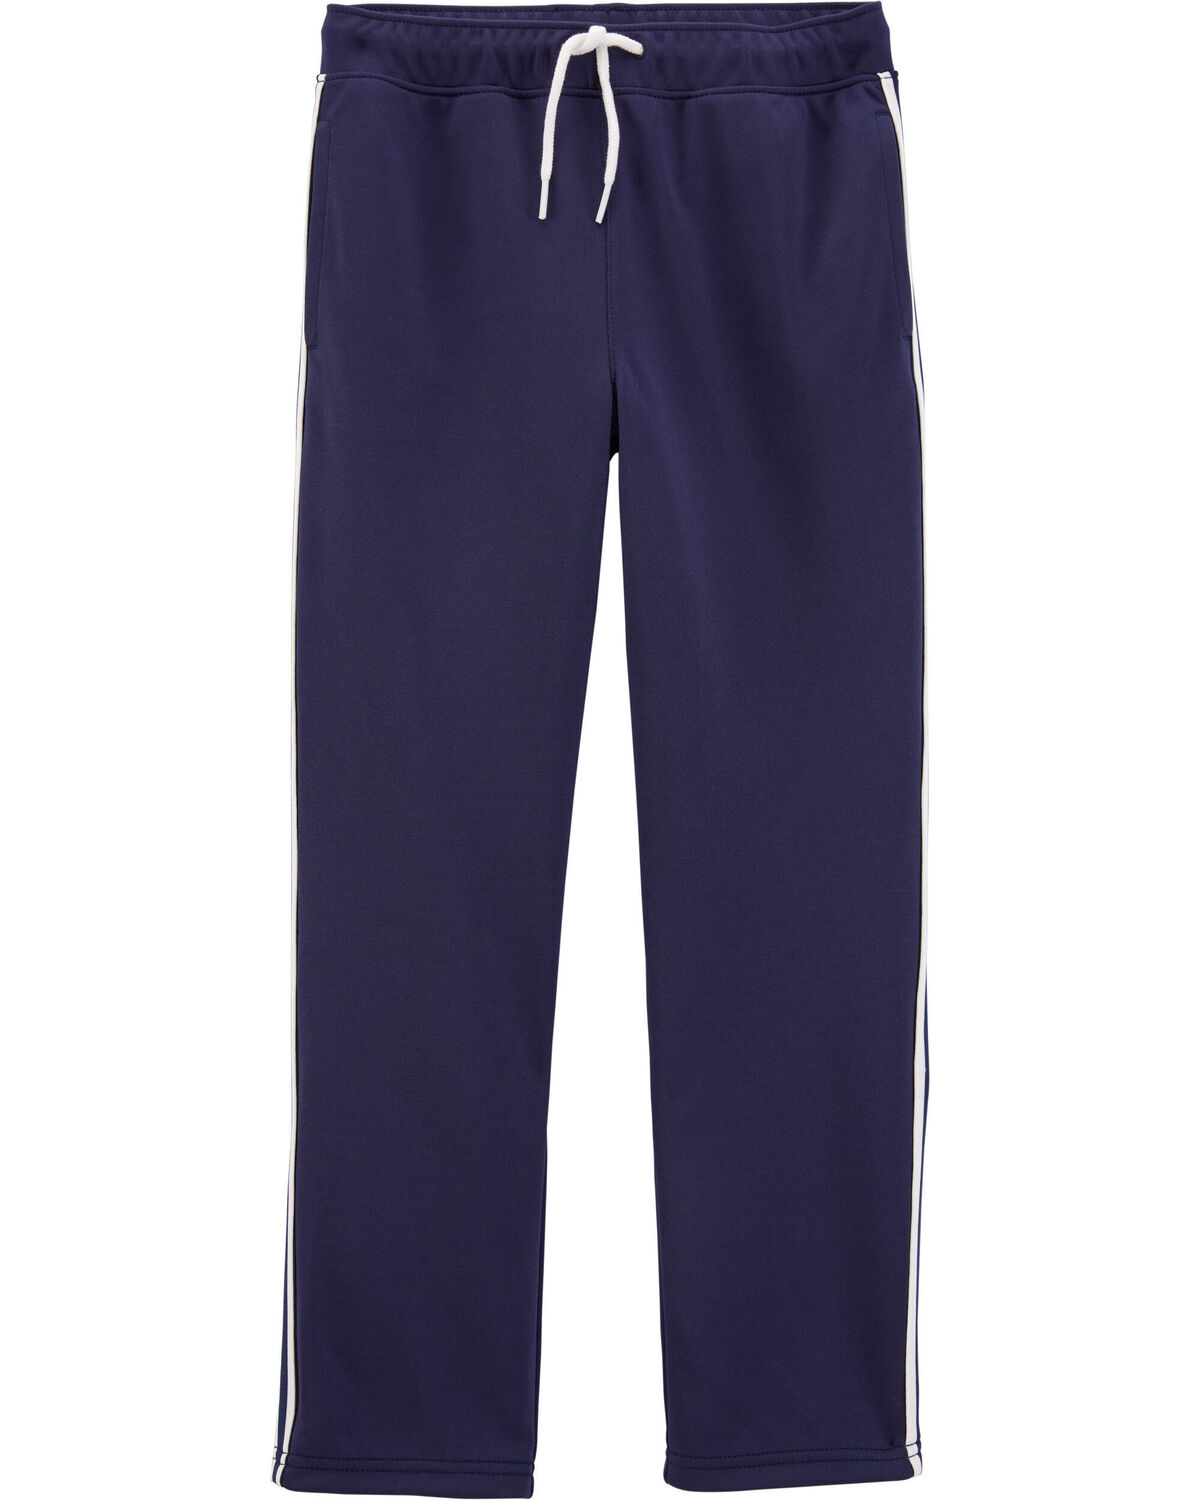 Navy Kid Pull-On Athletic Pants | carters.com